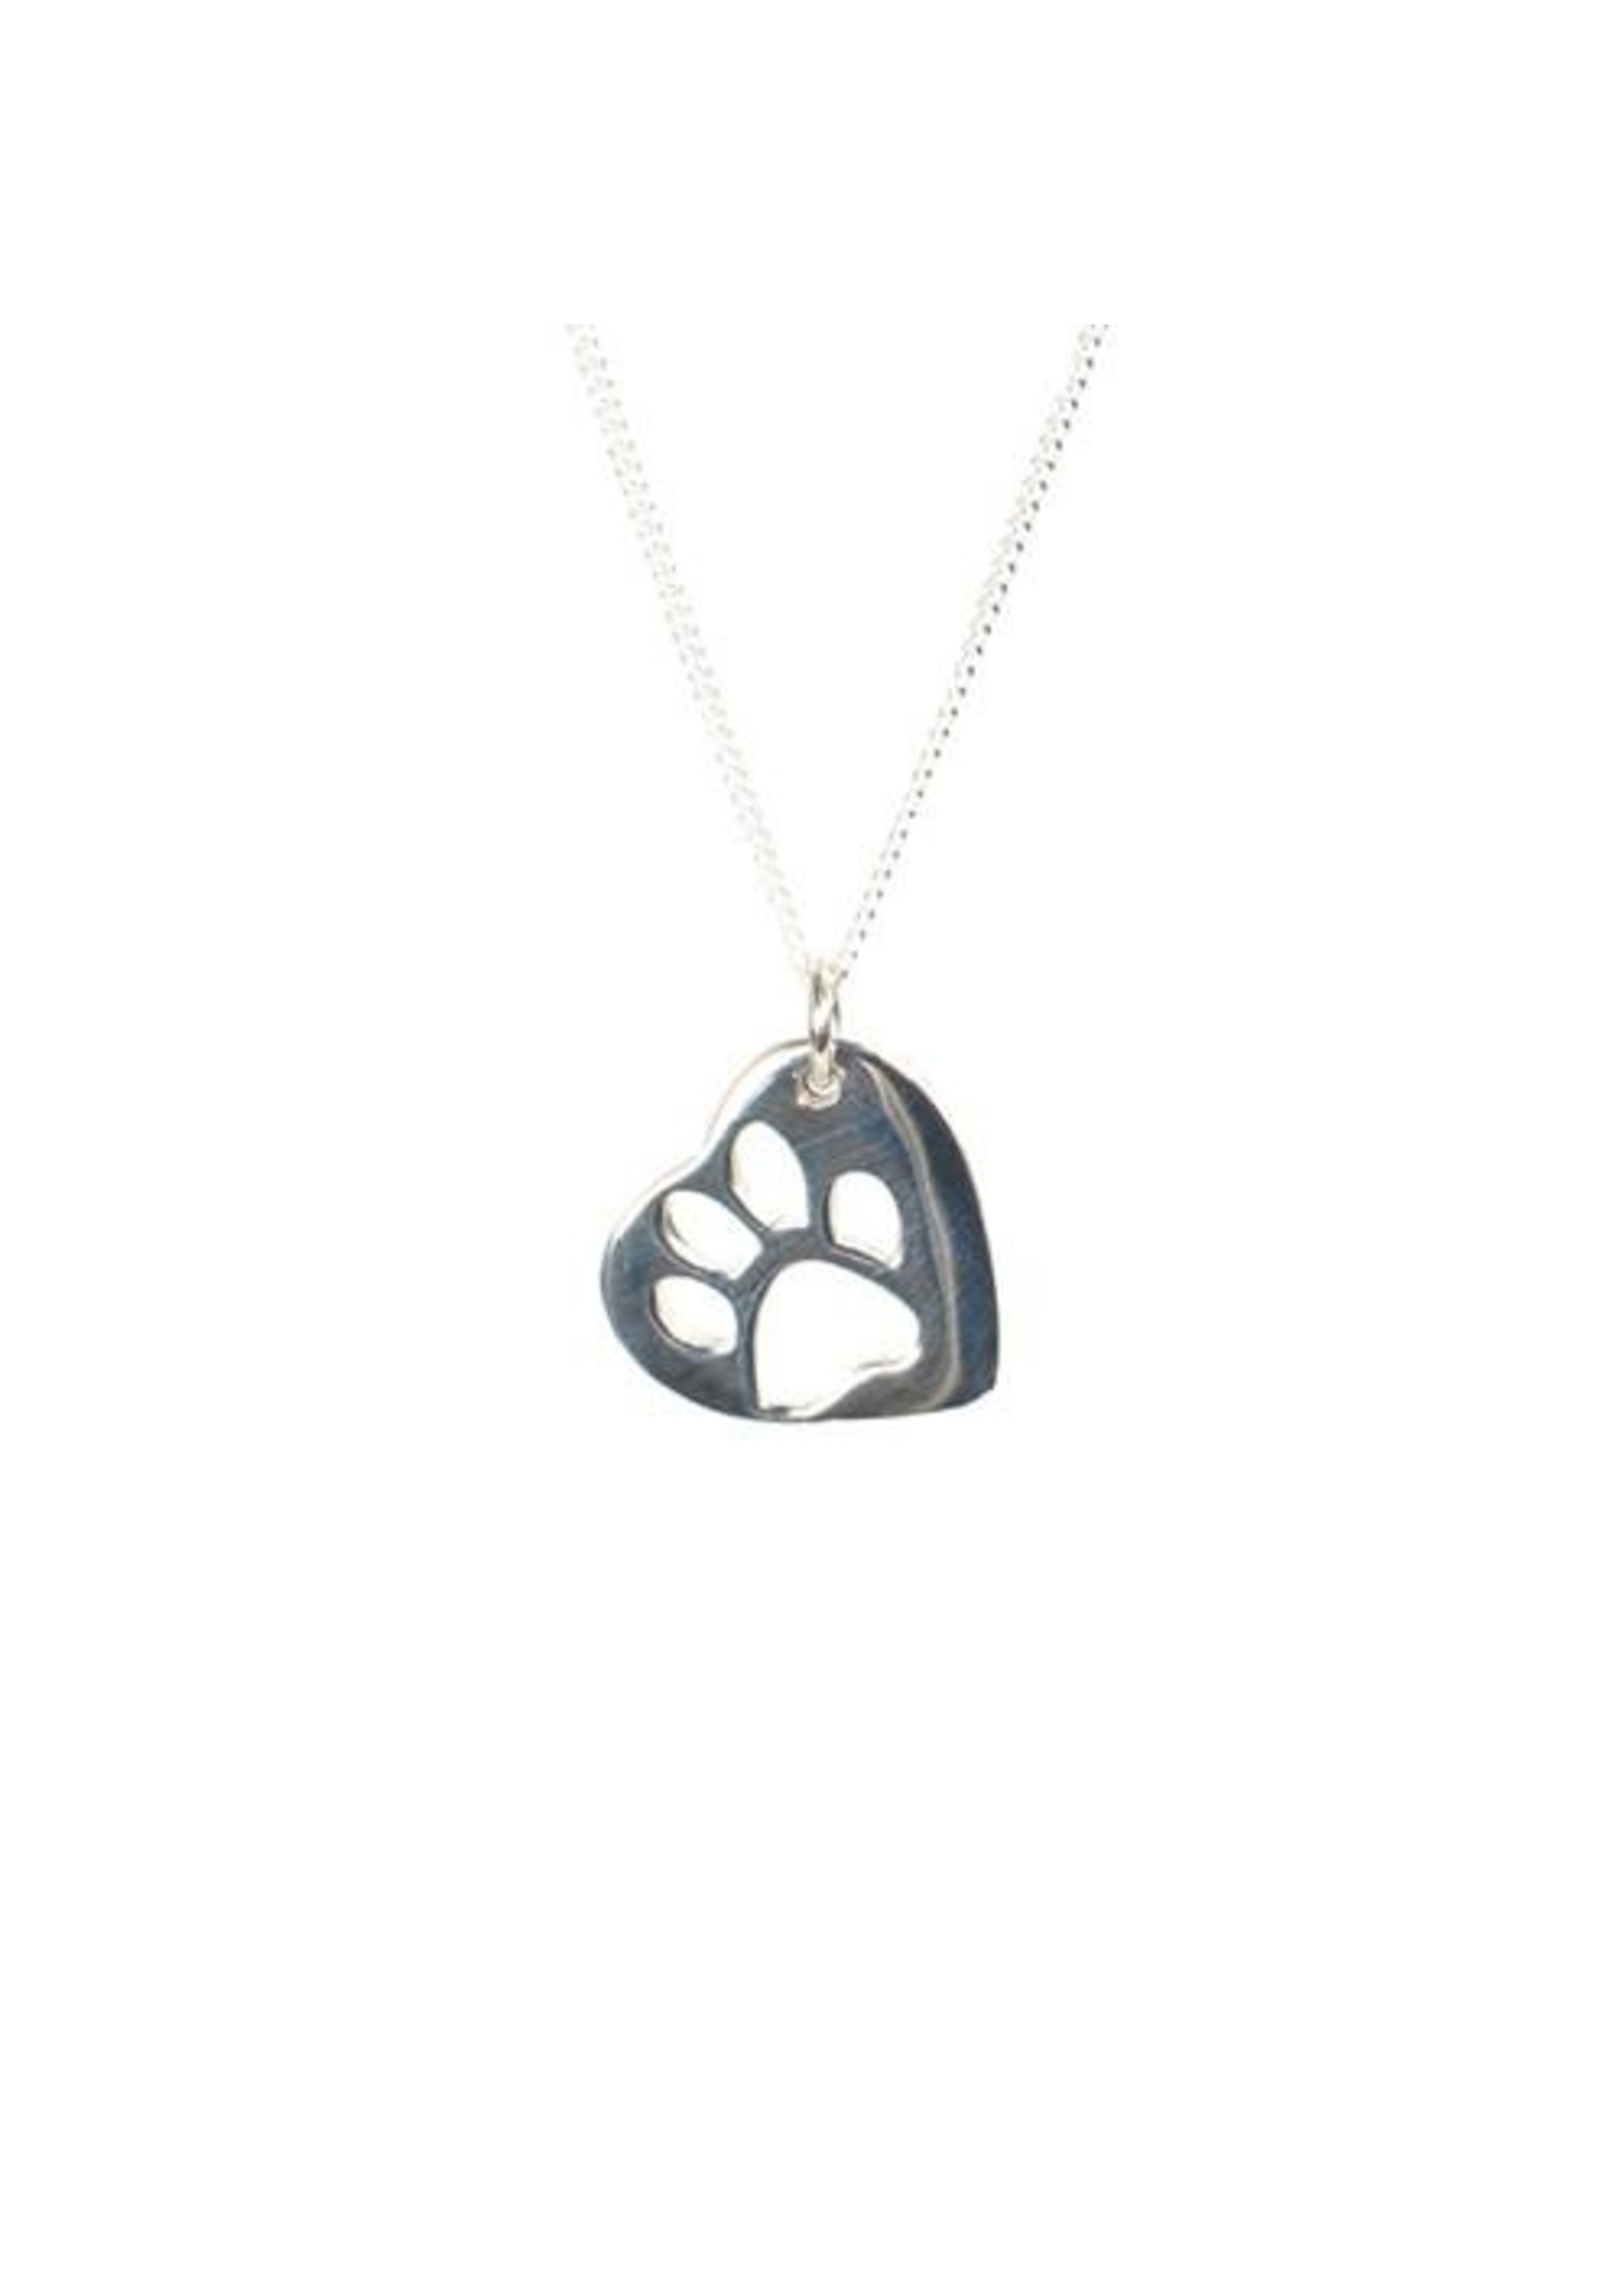 Mimi & Marge BAWA CHARITY PAW PRINT NECKLACE - Sterling Silver